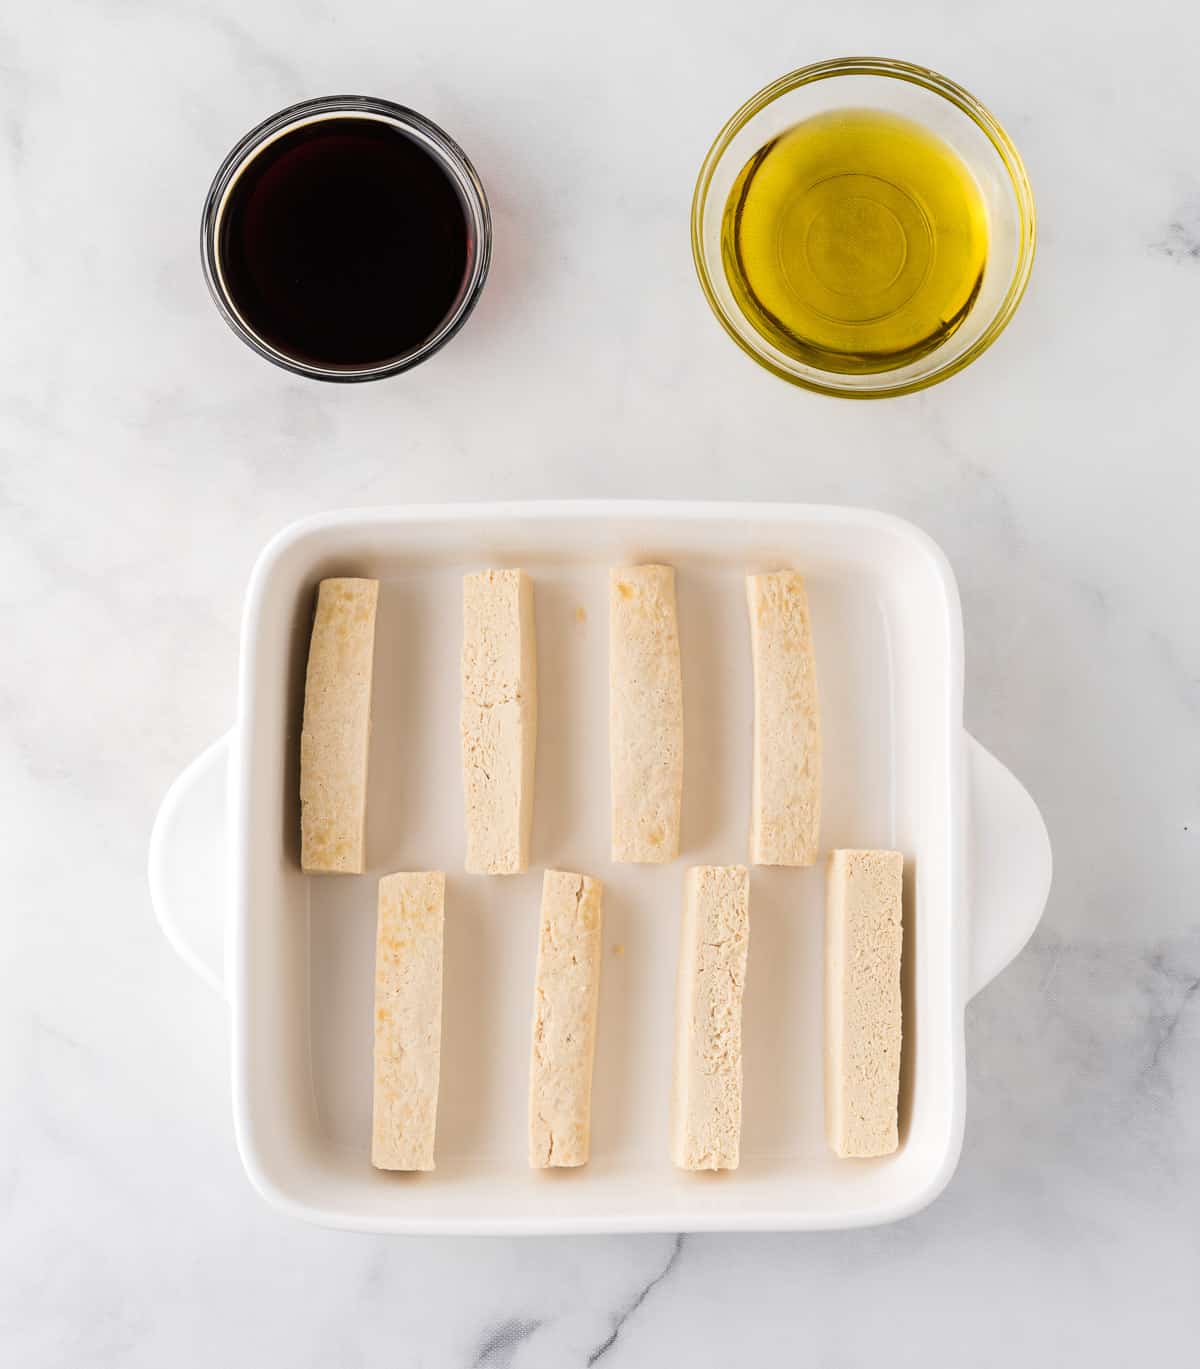 tofu blocks in a baking dish next to soy sauce and olive oil